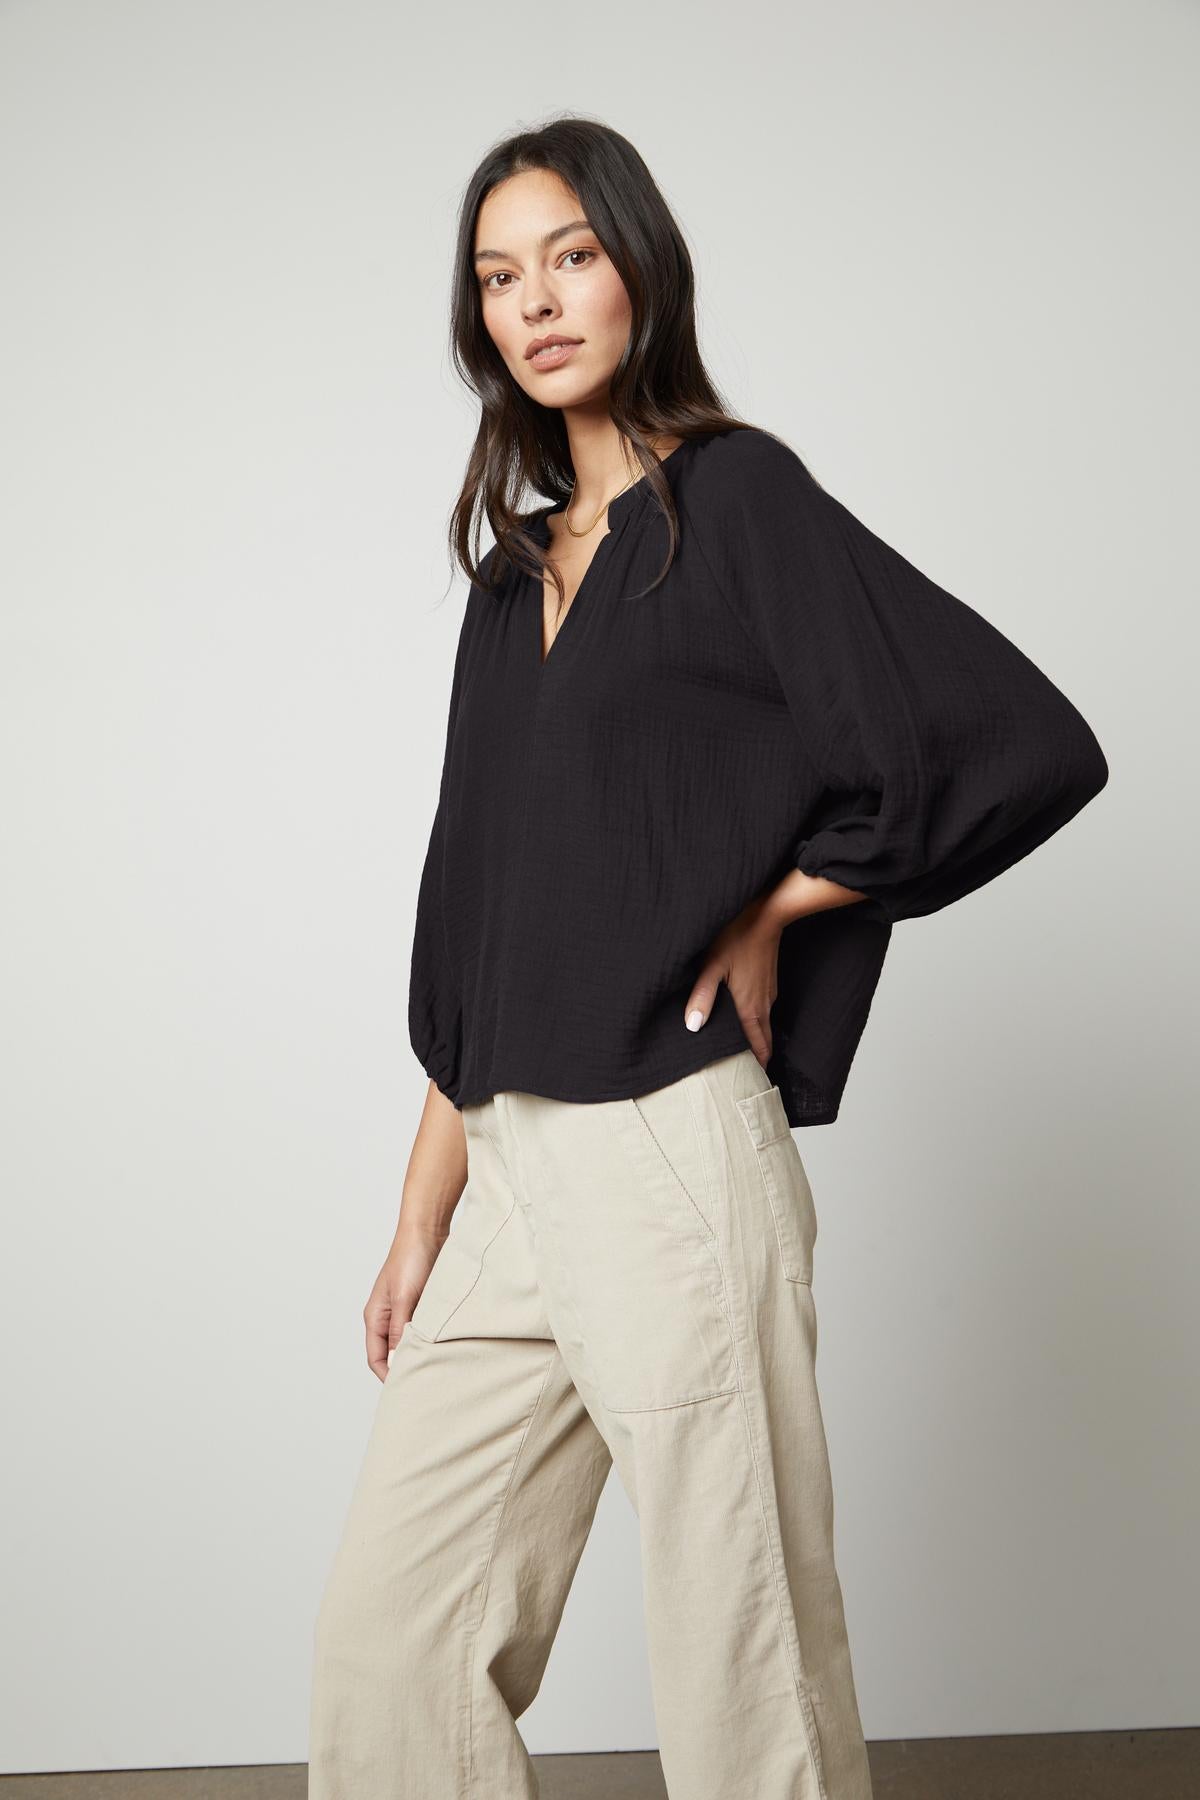   The model is wearing a relaxed-fit, black Velvet by Graham & Spencer top with a v-neckline and beige wide leg pants. 